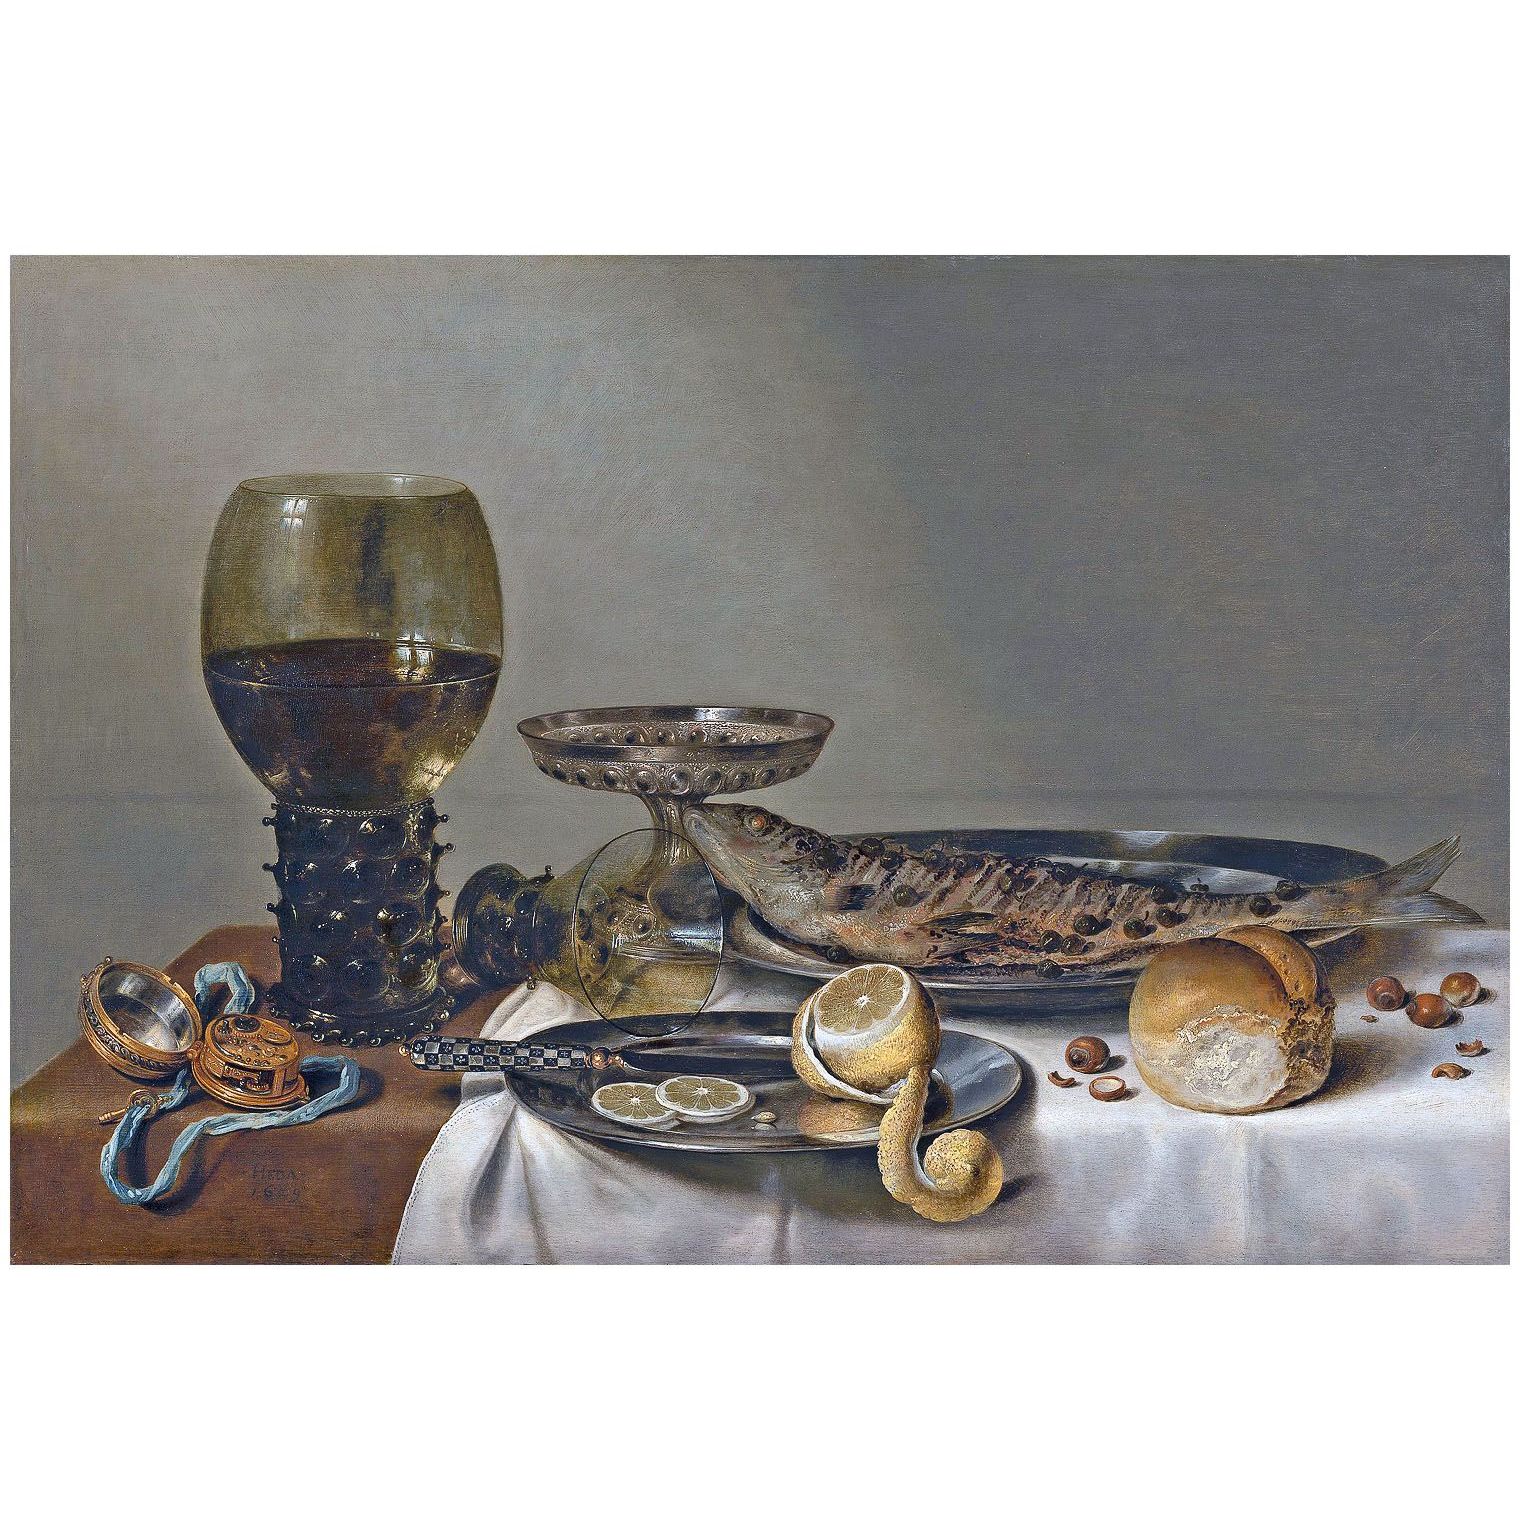 Willem Claesz Heda. Still-Life with a Roemer and Watch. 1629. Mauritshuis Den Haag